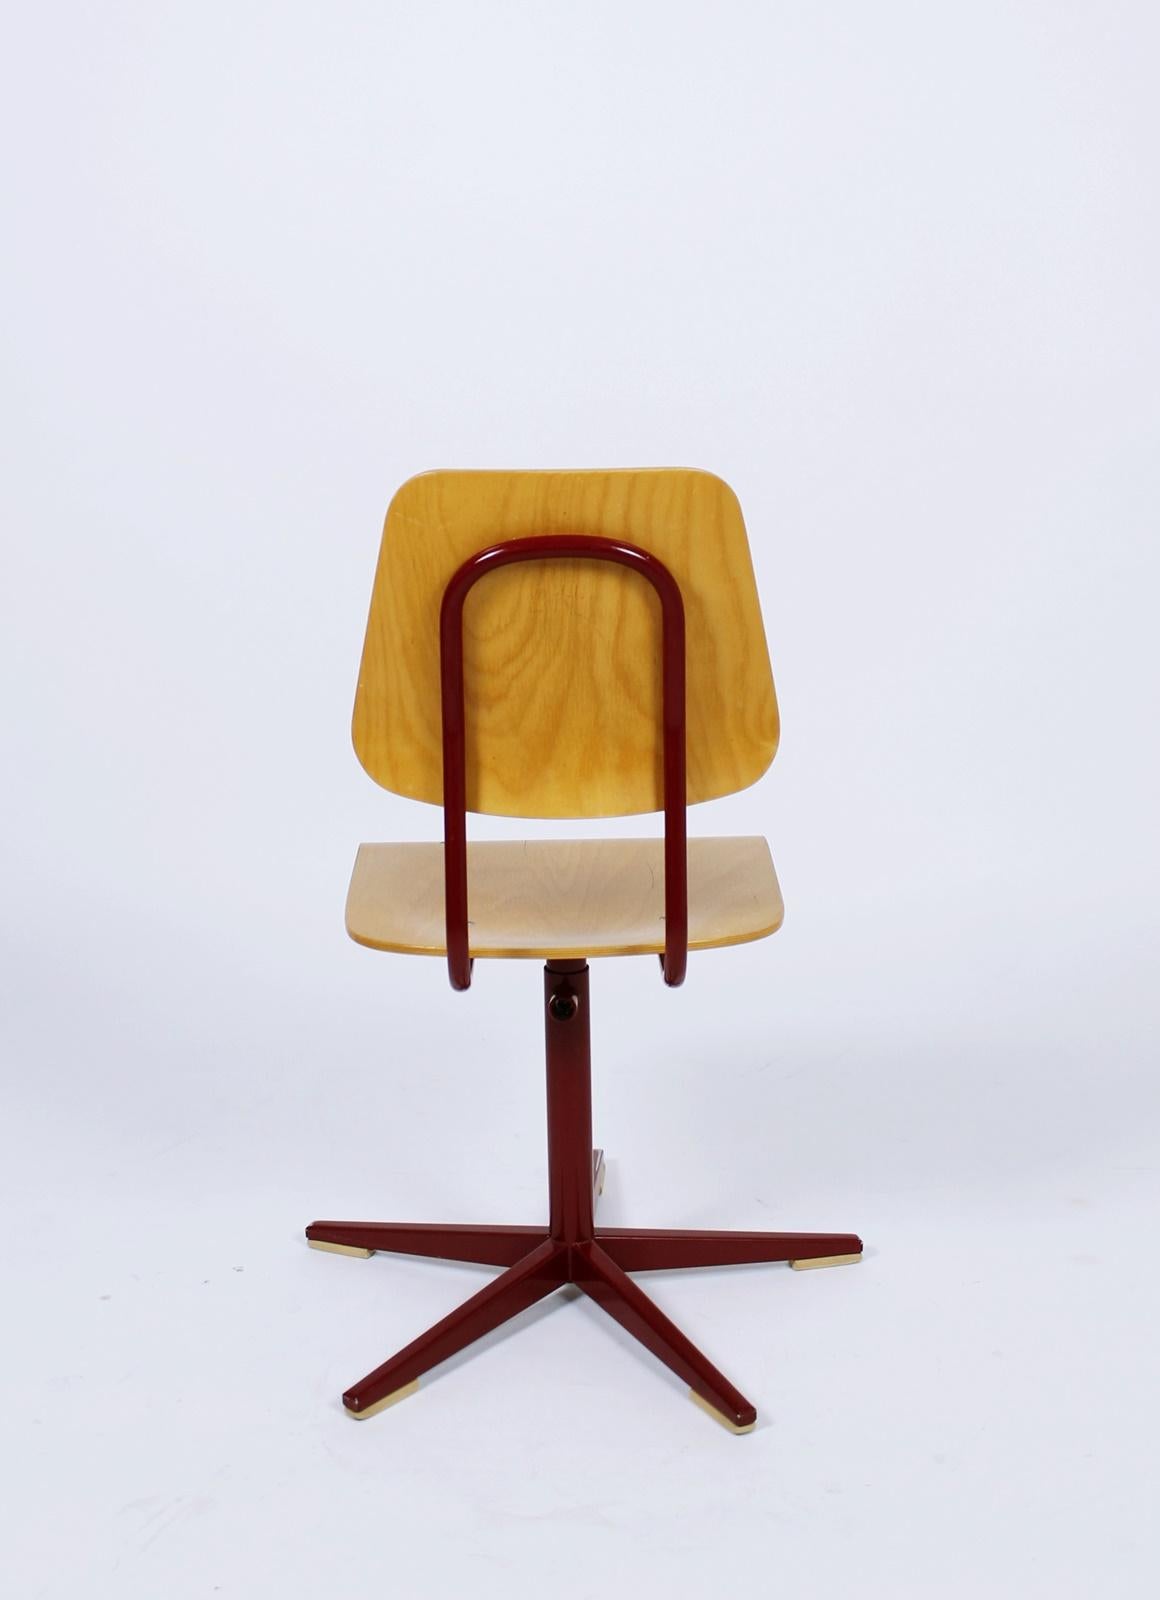 Mid-20th Century  Height Adjustable School Chair by Embru 1960's Switzerland For Sale